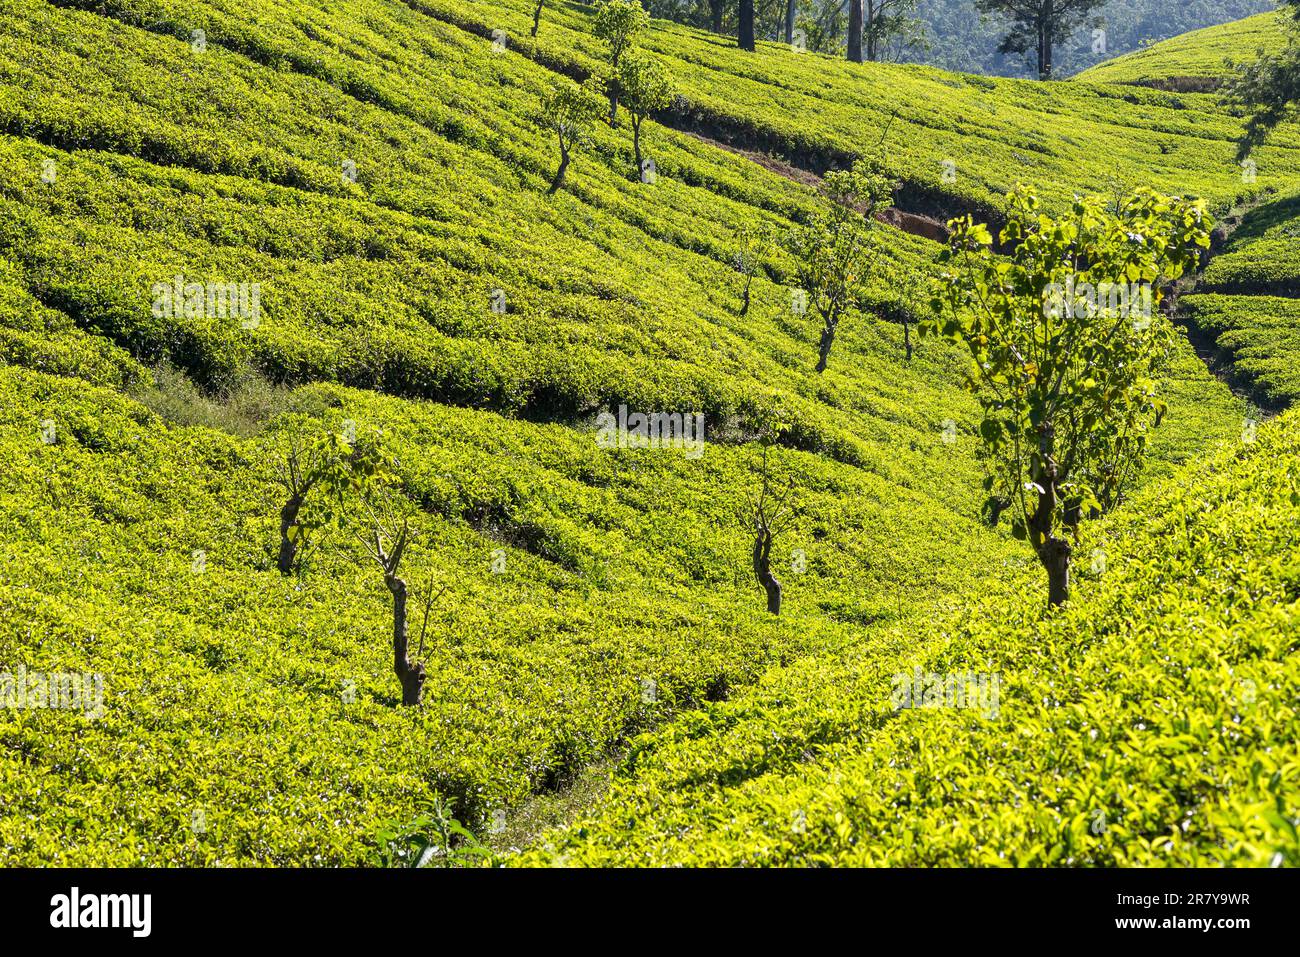 Tea plantation near the town Nuwara Eliya, approx 1900m above sea level. Tea production is on of the main economic sources of the country. Sri Lanka Stock Photo